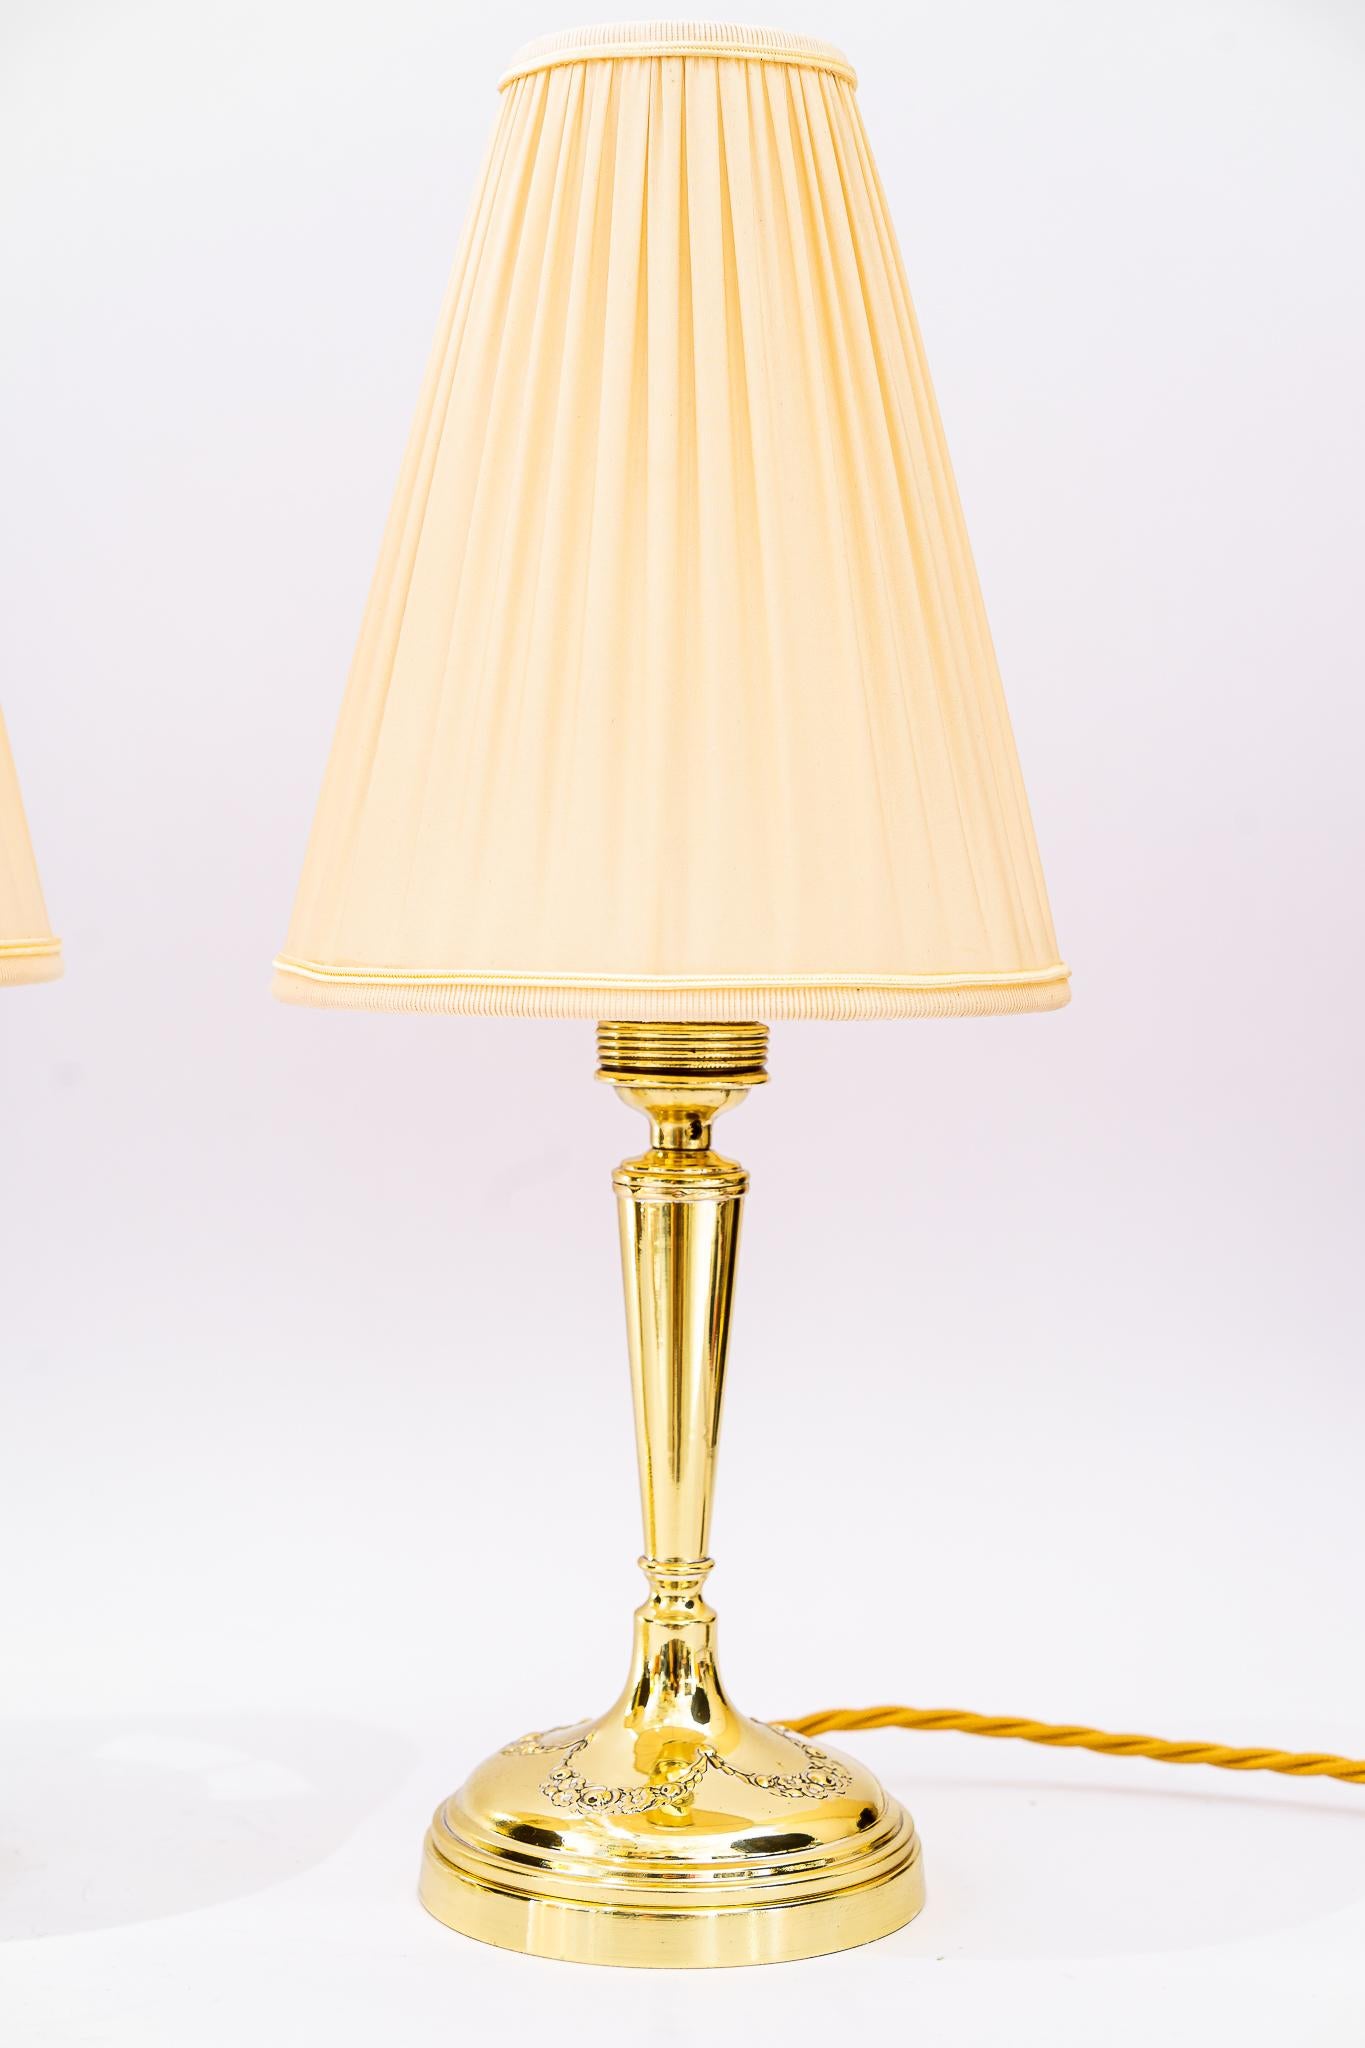 Two Art Deco Table lamp, Vienna, around 1920s
Polished and stove enameled.
The fabric shades are replaced (new).